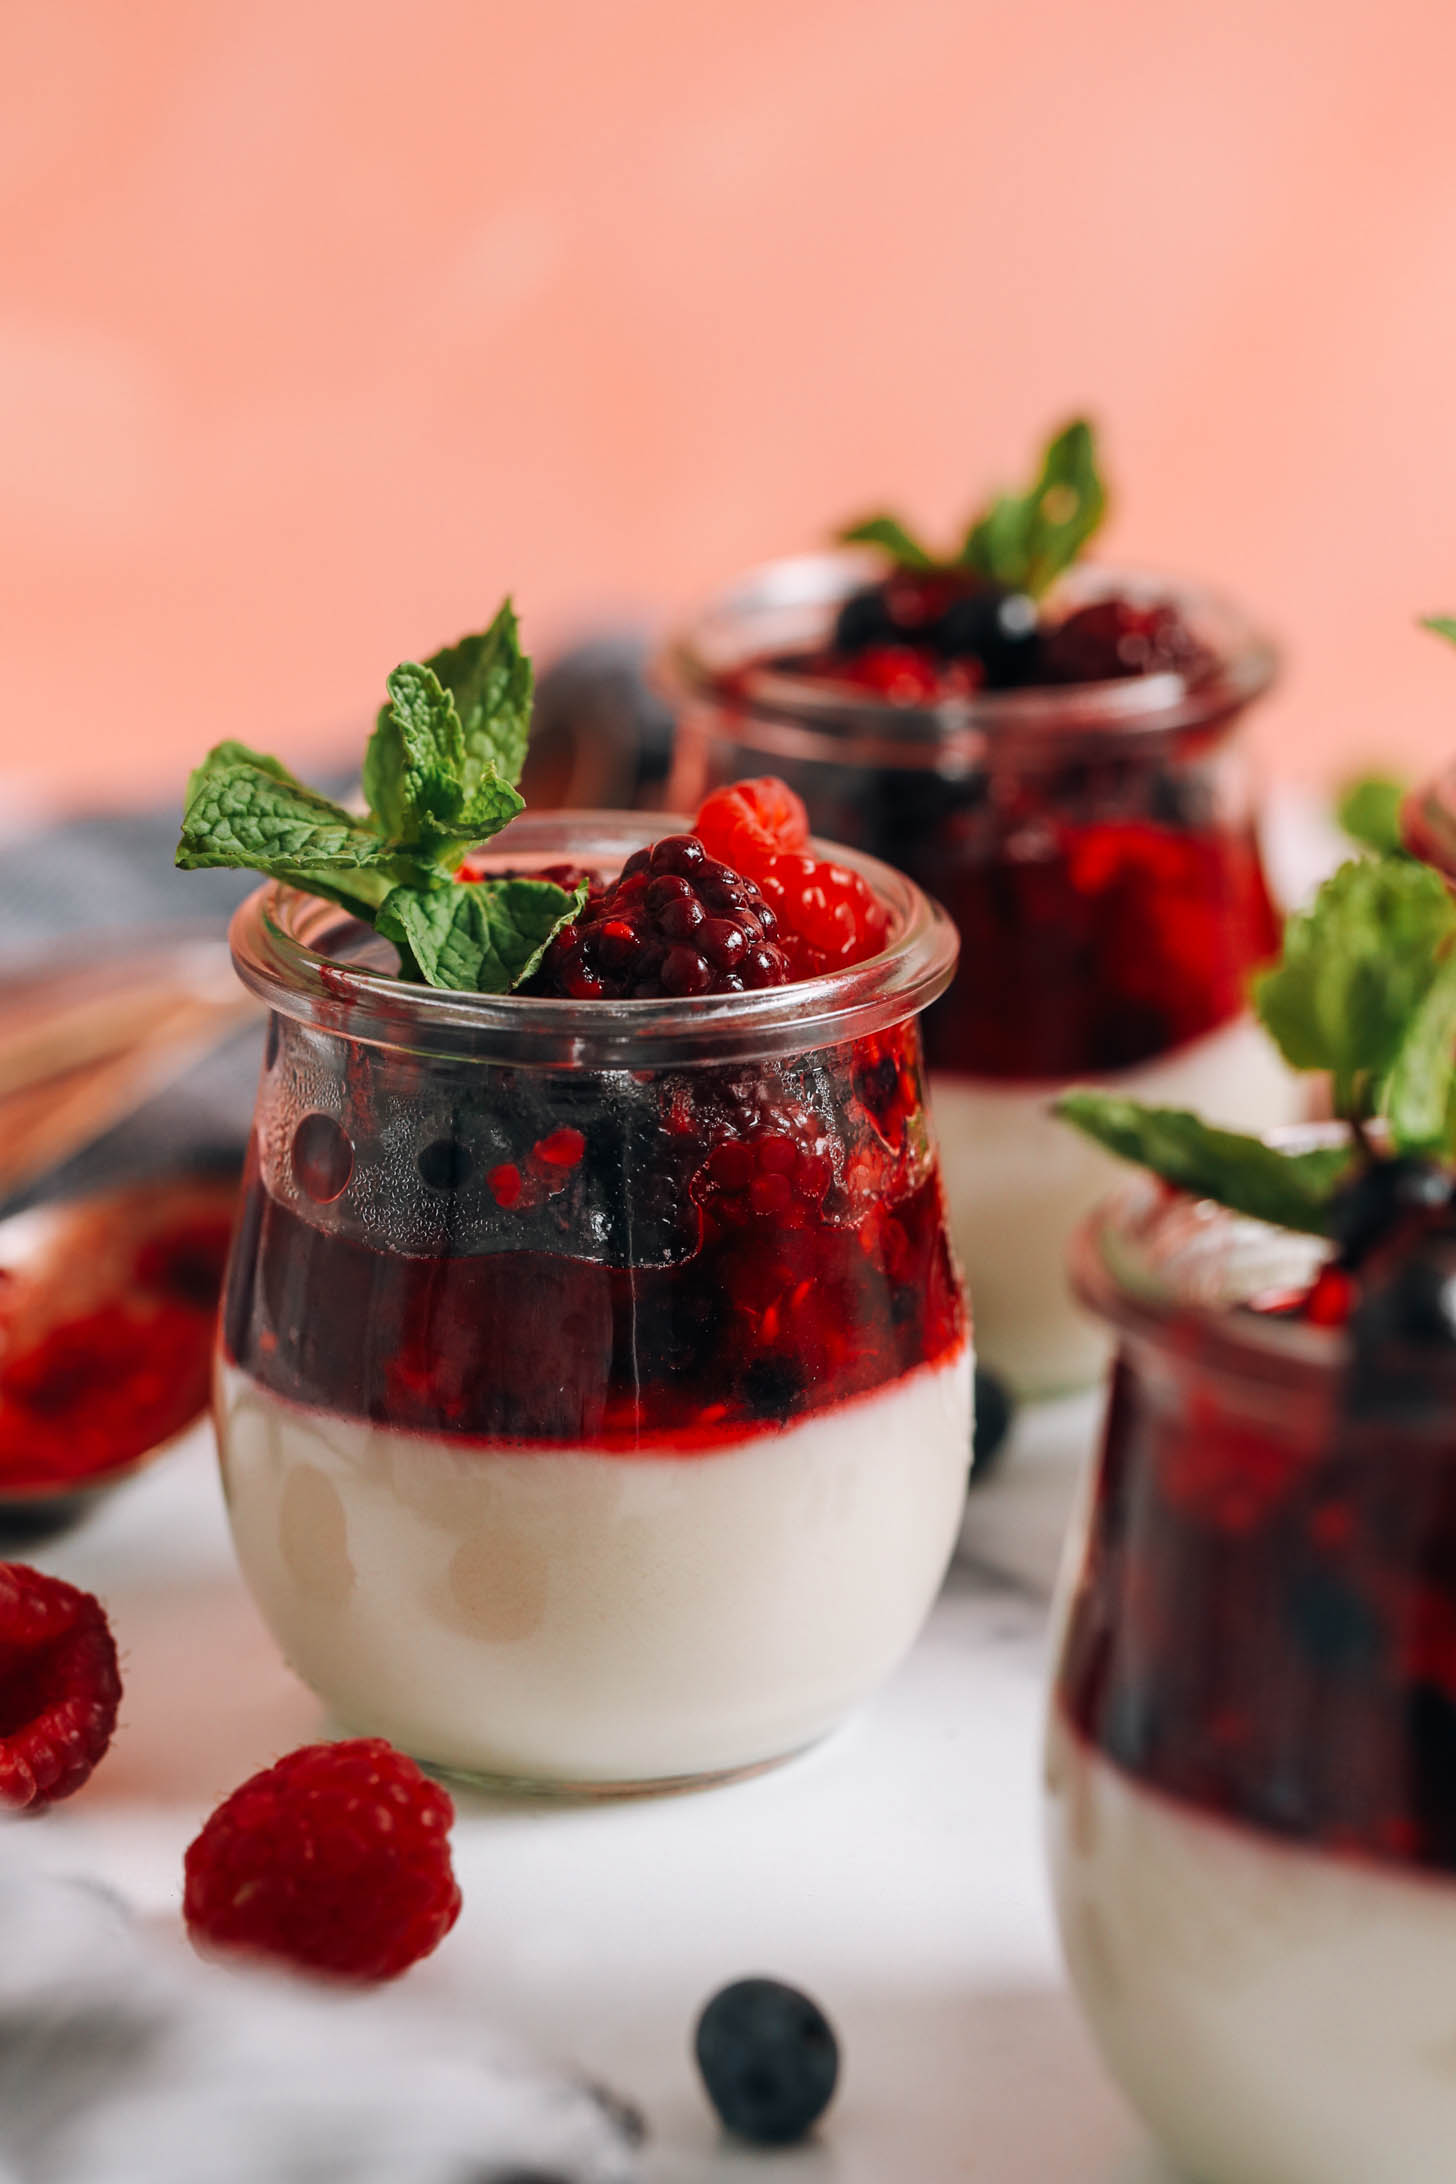 Fresh mint leaves in jars of vegan panna cotta with mixed berries